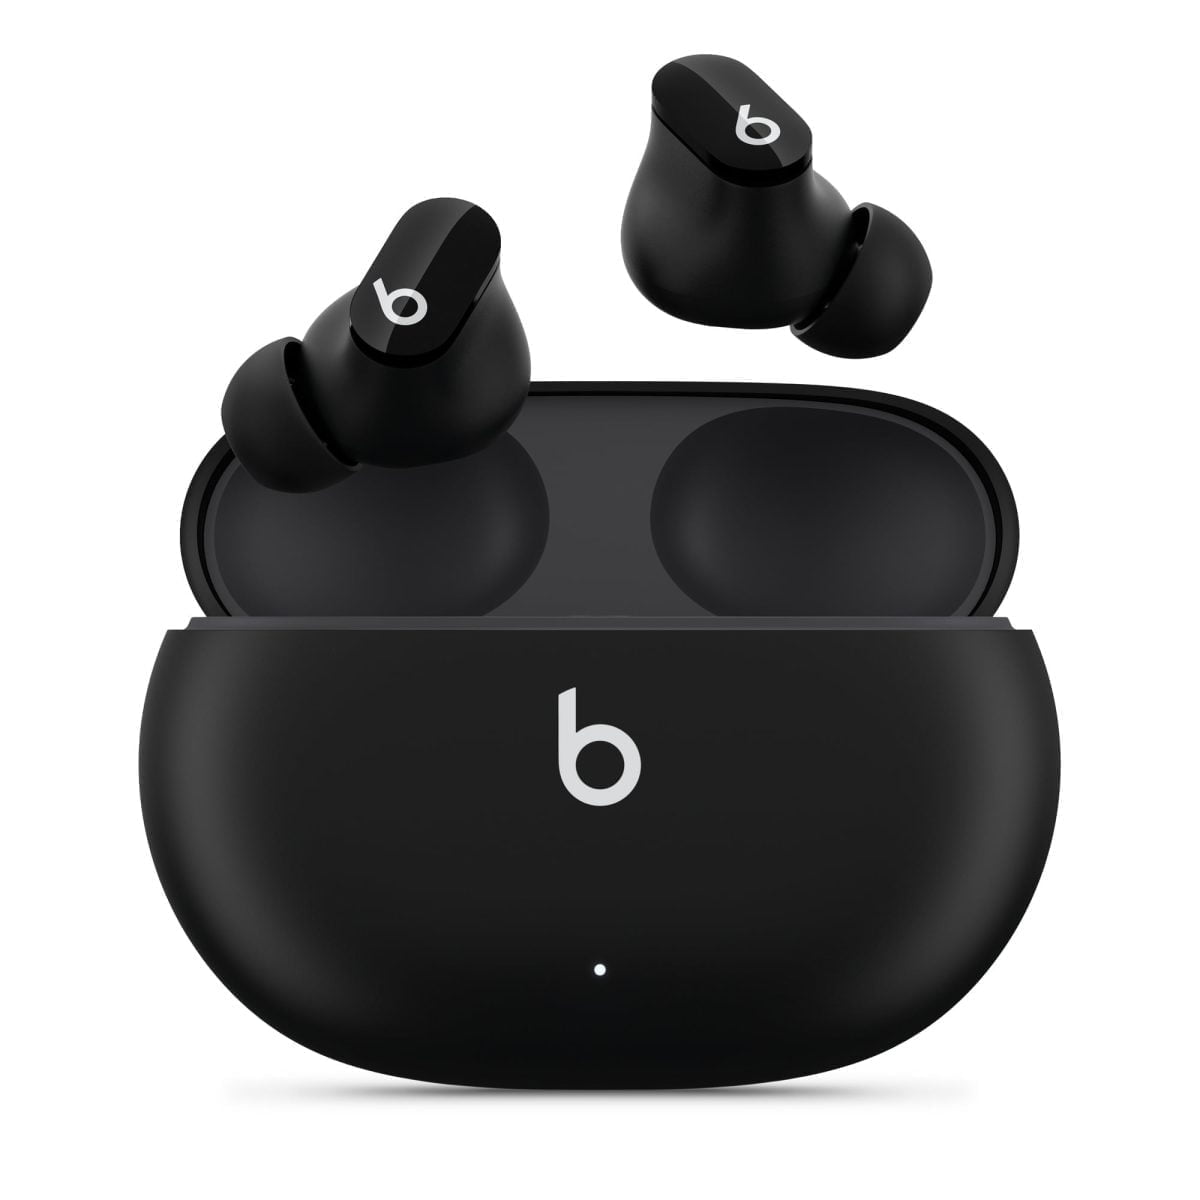 Mj4X3 Apple &Amp;Lt;H1 Data-Autom=&Amp;Quot;Sectiontitle&Amp;Quot;&Amp;Gt;Beats Studio Buds – True Wireless Noise Cancelling Earphones – Black&Amp;Lt;/H1&Amp;Gt; &Amp;Lt;Div Class=&Amp;Quot;Rc-Pdsection-Mainpanel Column Large-9 Small-12&Amp;Quot;&Amp;Gt; &Amp;Lt;Div Class=&Amp;Quot;Para-List&Amp;Quot;&Amp;Gt; Custom Acoustic Platform Delivers Powerful, Balanced Sound &Amp;Lt;/Div&Amp;Gt; &Amp;Lt;Div Class=&Amp;Quot;Para-List&Amp;Quot;&Amp;Gt; Active Noise Cancelling (Anc) Blocks External Noise For Immersive Listening &Amp;Lt;/Div&Amp;Gt; &Amp;Lt;Div Class=&Amp;Quot;Para-List&Amp;Quot;&Amp;Gt; Easily Switch To Transparency Mode To Hear The World Around You &Amp;Lt;/Div&Amp;Gt; &Amp;Lt;Div Class=&Amp;Quot;Para-List&Amp;Quot;&Amp;Gt; Simple One-Touch Pairing For Both Apple And Android Devices &Amp;Lt;/Div&Amp;Gt; &Amp;Lt;Div Class=&Amp;Quot;Para-List&Amp;Quot;&Amp;Gt; High-Quality Call Performance And Voice Assistant Interaction Via Dual Beamforming Mics &Amp;Lt;/Div&Amp;Gt; &Amp;Lt;Div Class=&Amp;Quot;Para-List&Amp;Quot;&Amp;Gt; Ipx4-Rated Sweat And Water Resistant Wireless Earbuds &Amp;Lt;/Div&Amp;Gt; &Amp;Lt;Div Class=&Amp;Quot;Para-List&Amp;Quot;&Amp;Gt; Three Soft Eartip Sizes For A Stable And Comfortable Fit While Ensuring An Optimal Acoustic Seal &Amp;Lt;/Div&Amp;Gt; &Amp;Lt;Div Class=&Amp;Quot;Para-List&Amp;Quot;&Amp;Gt; Up To 8 Hours Of Listening Time (Up To 24 Hours Combined With Pocket-Sized Charging Case) &Amp;Lt;/Div&Amp;Gt; &Amp;Lt;Div Class=&Amp;Quot;Para-List&Amp;Quot;&Amp;Gt; Activate Siri Hands-Free Just By Saying “Hey Siri” &Amp;Lt;/Div&Amp;Gt; &Amp;Lt;Div Class=&Amp;Quot;Para-List&Amp;Quot;&Amp;Gt; Industry-Leading Class 1 Bluetooth For Extended Range And Fewer Dropouts &Amp;Lt;/Div&Amp;Gt; &Amp;Lt;Div Class=&Amp;Quot;Para-List As-Pdp-Lastparalist&Amp;Quot;&Amp;Gt; Usb-C Universal Charging &Amp;Lt;/Div&Amp;Gt; &Amp;Lt;/Div&Amp;Gt; Beats Studio Buds Black Beats Studio Buds – True Wireless Noise Cancelling Earphones – Black